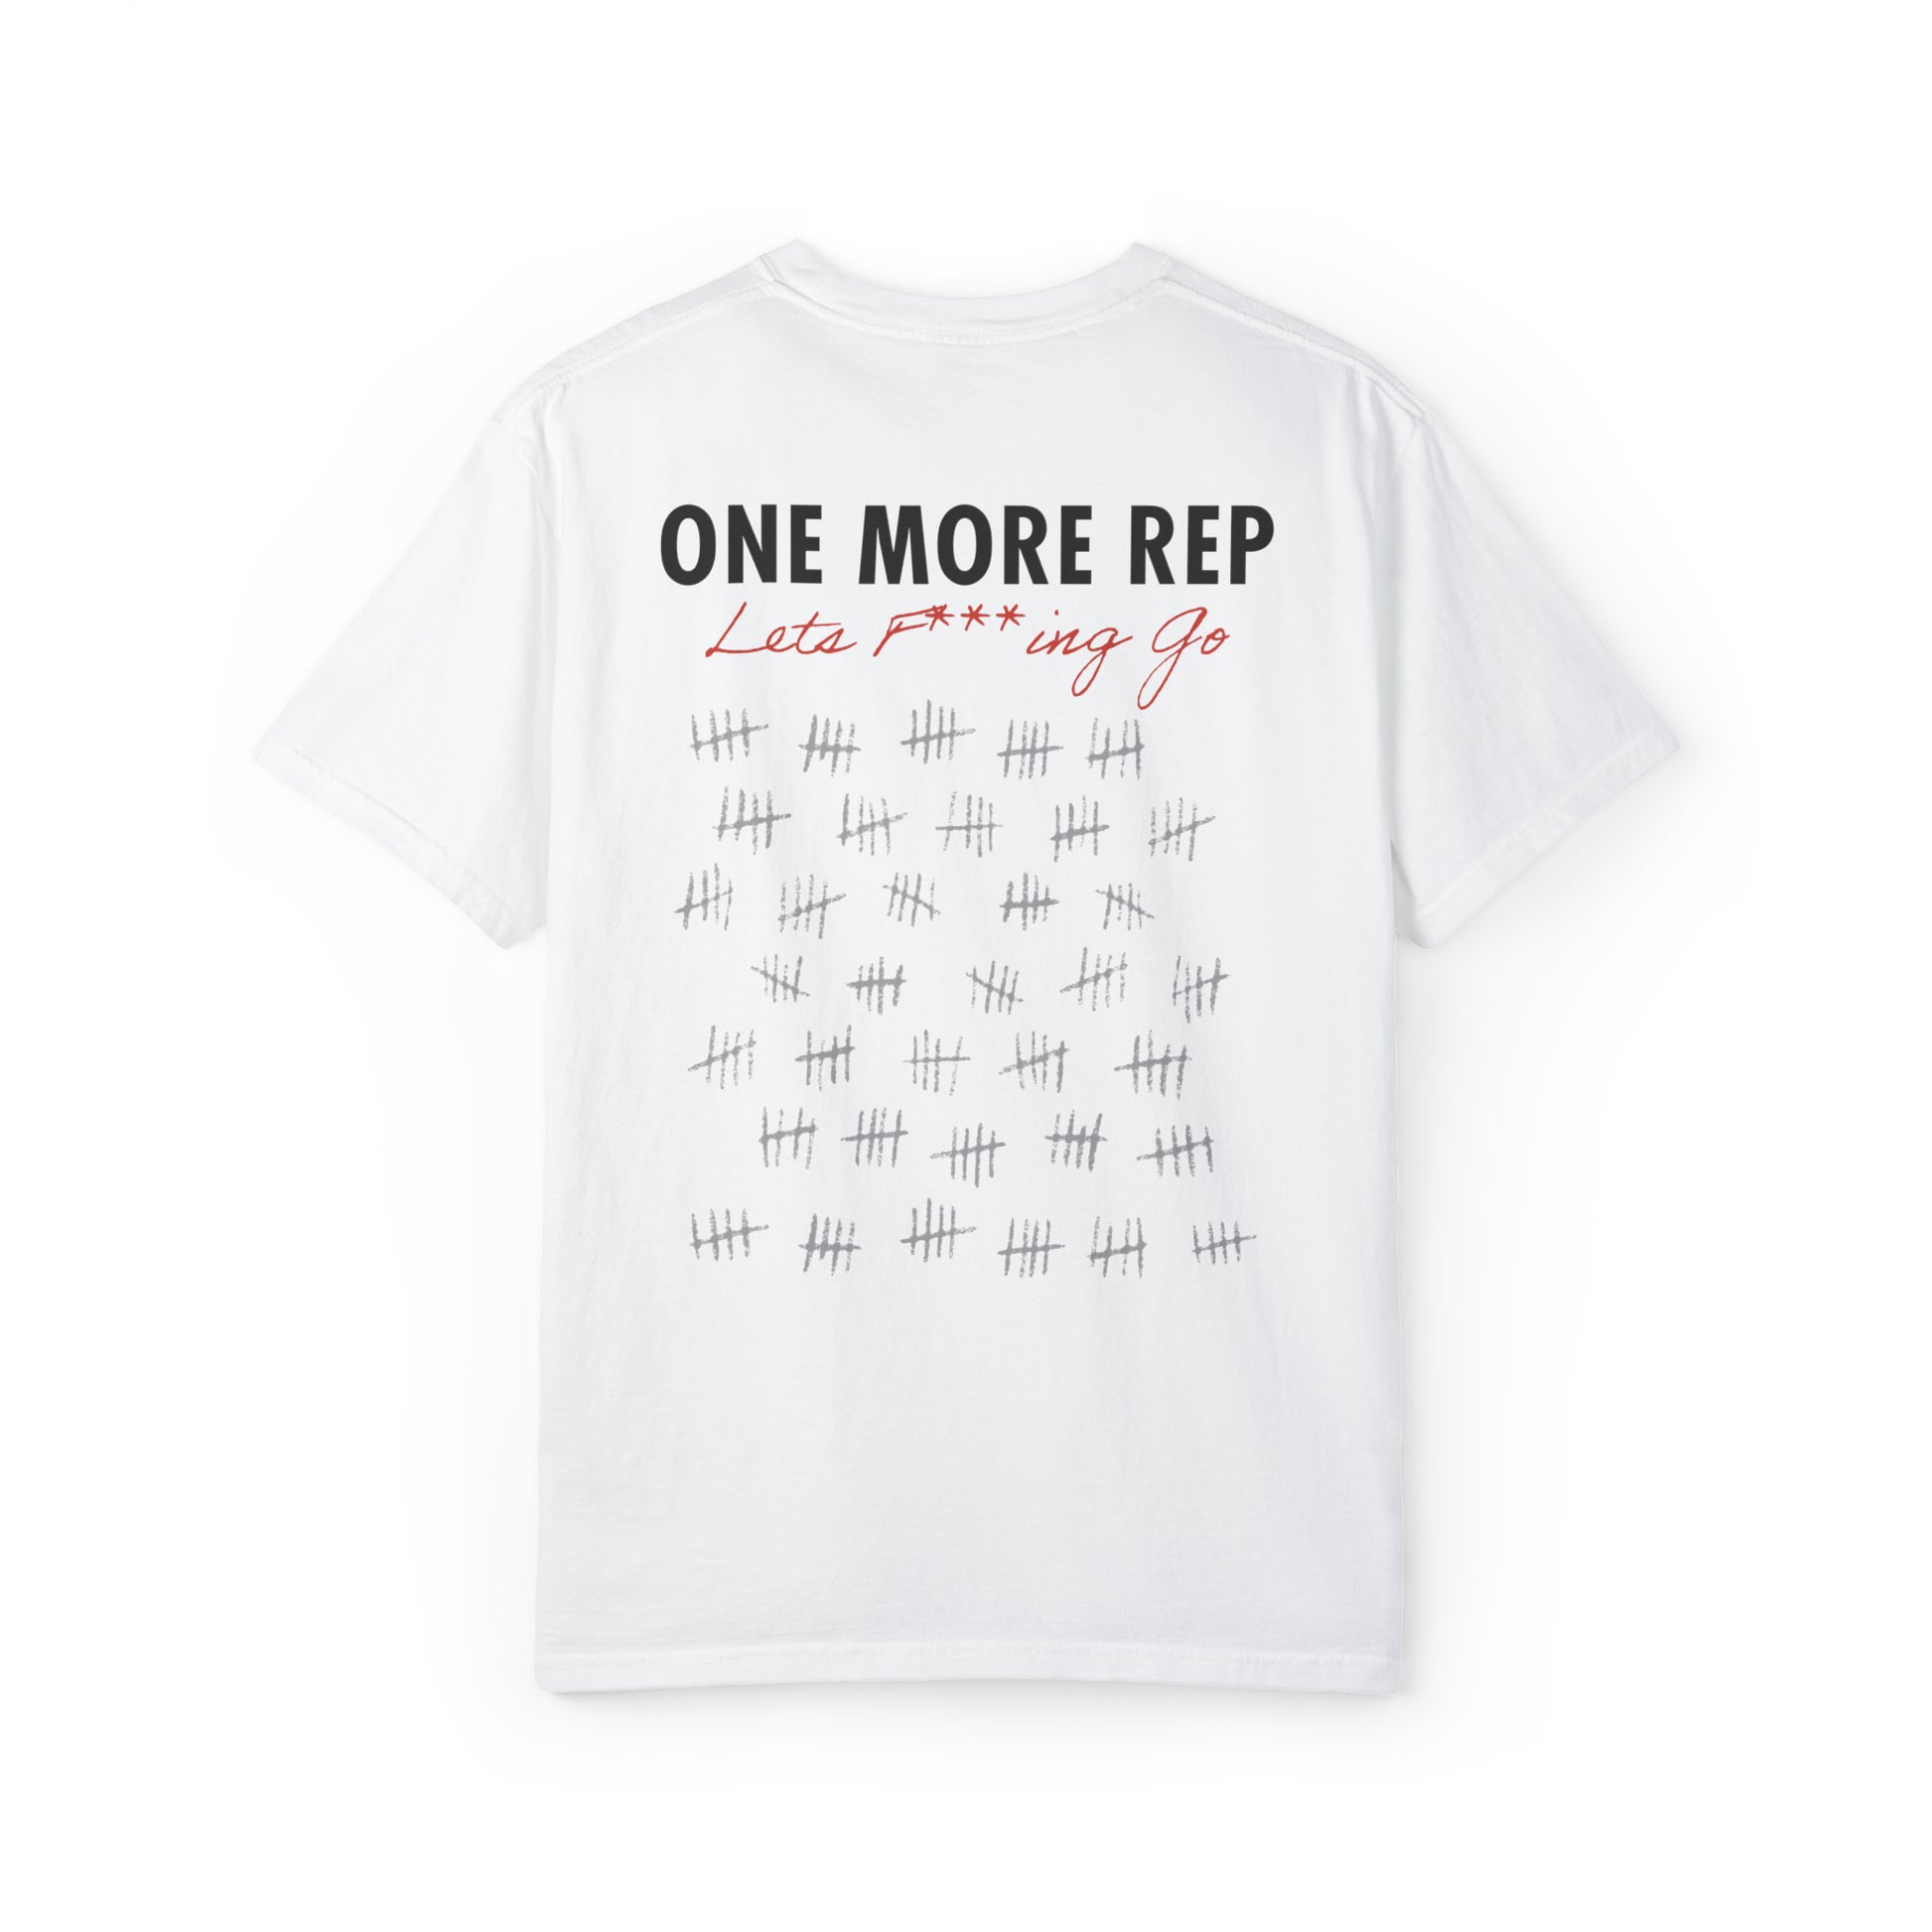 Casual White T-Shirt w/ Logo, Text, And Tally Graphics